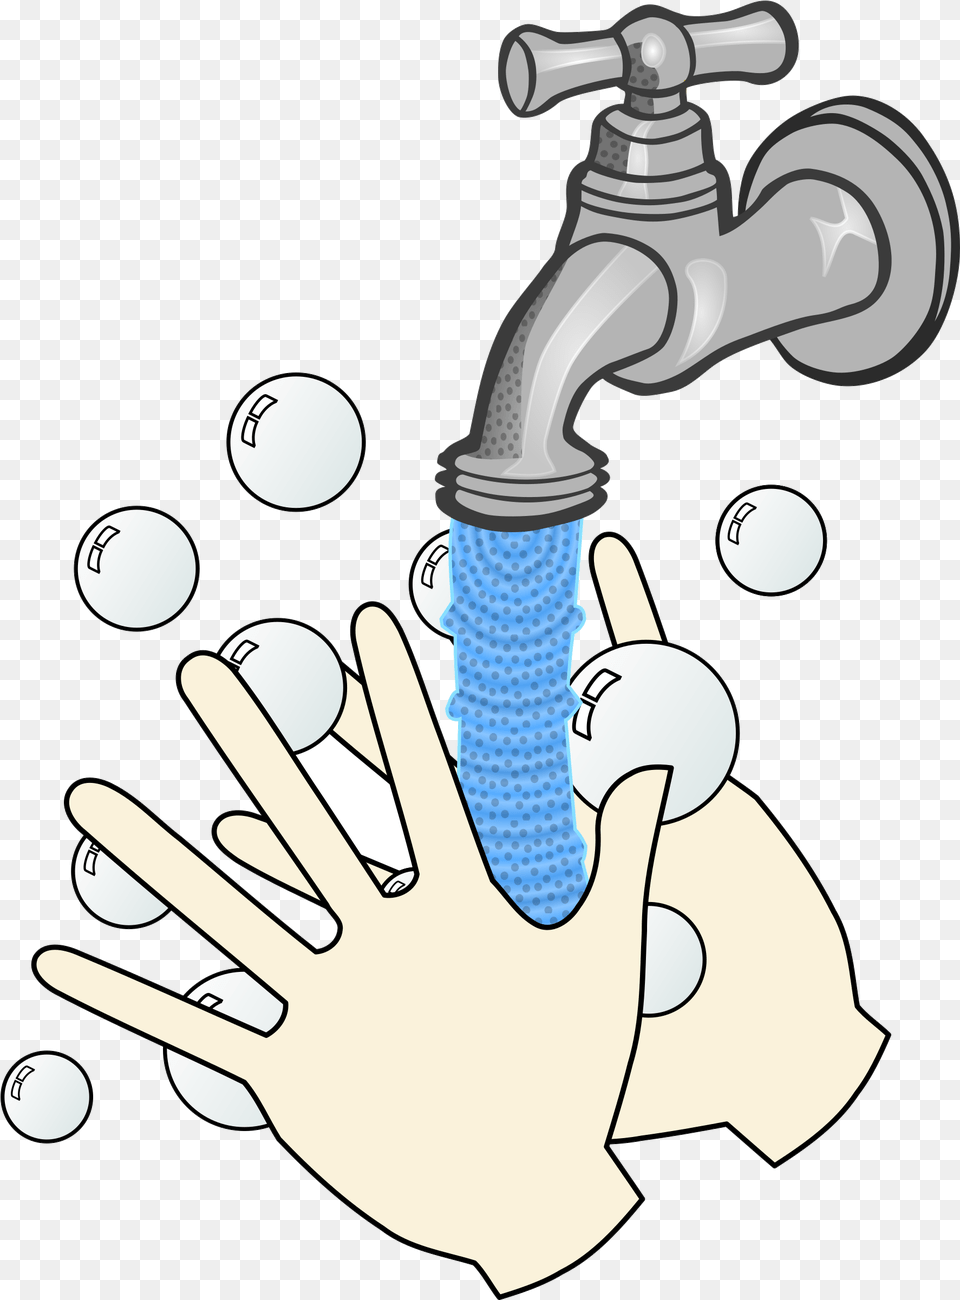 Download Running Water Images Wash Your Hands With Soap And Water, Tap, Smoke Pipe Png Image